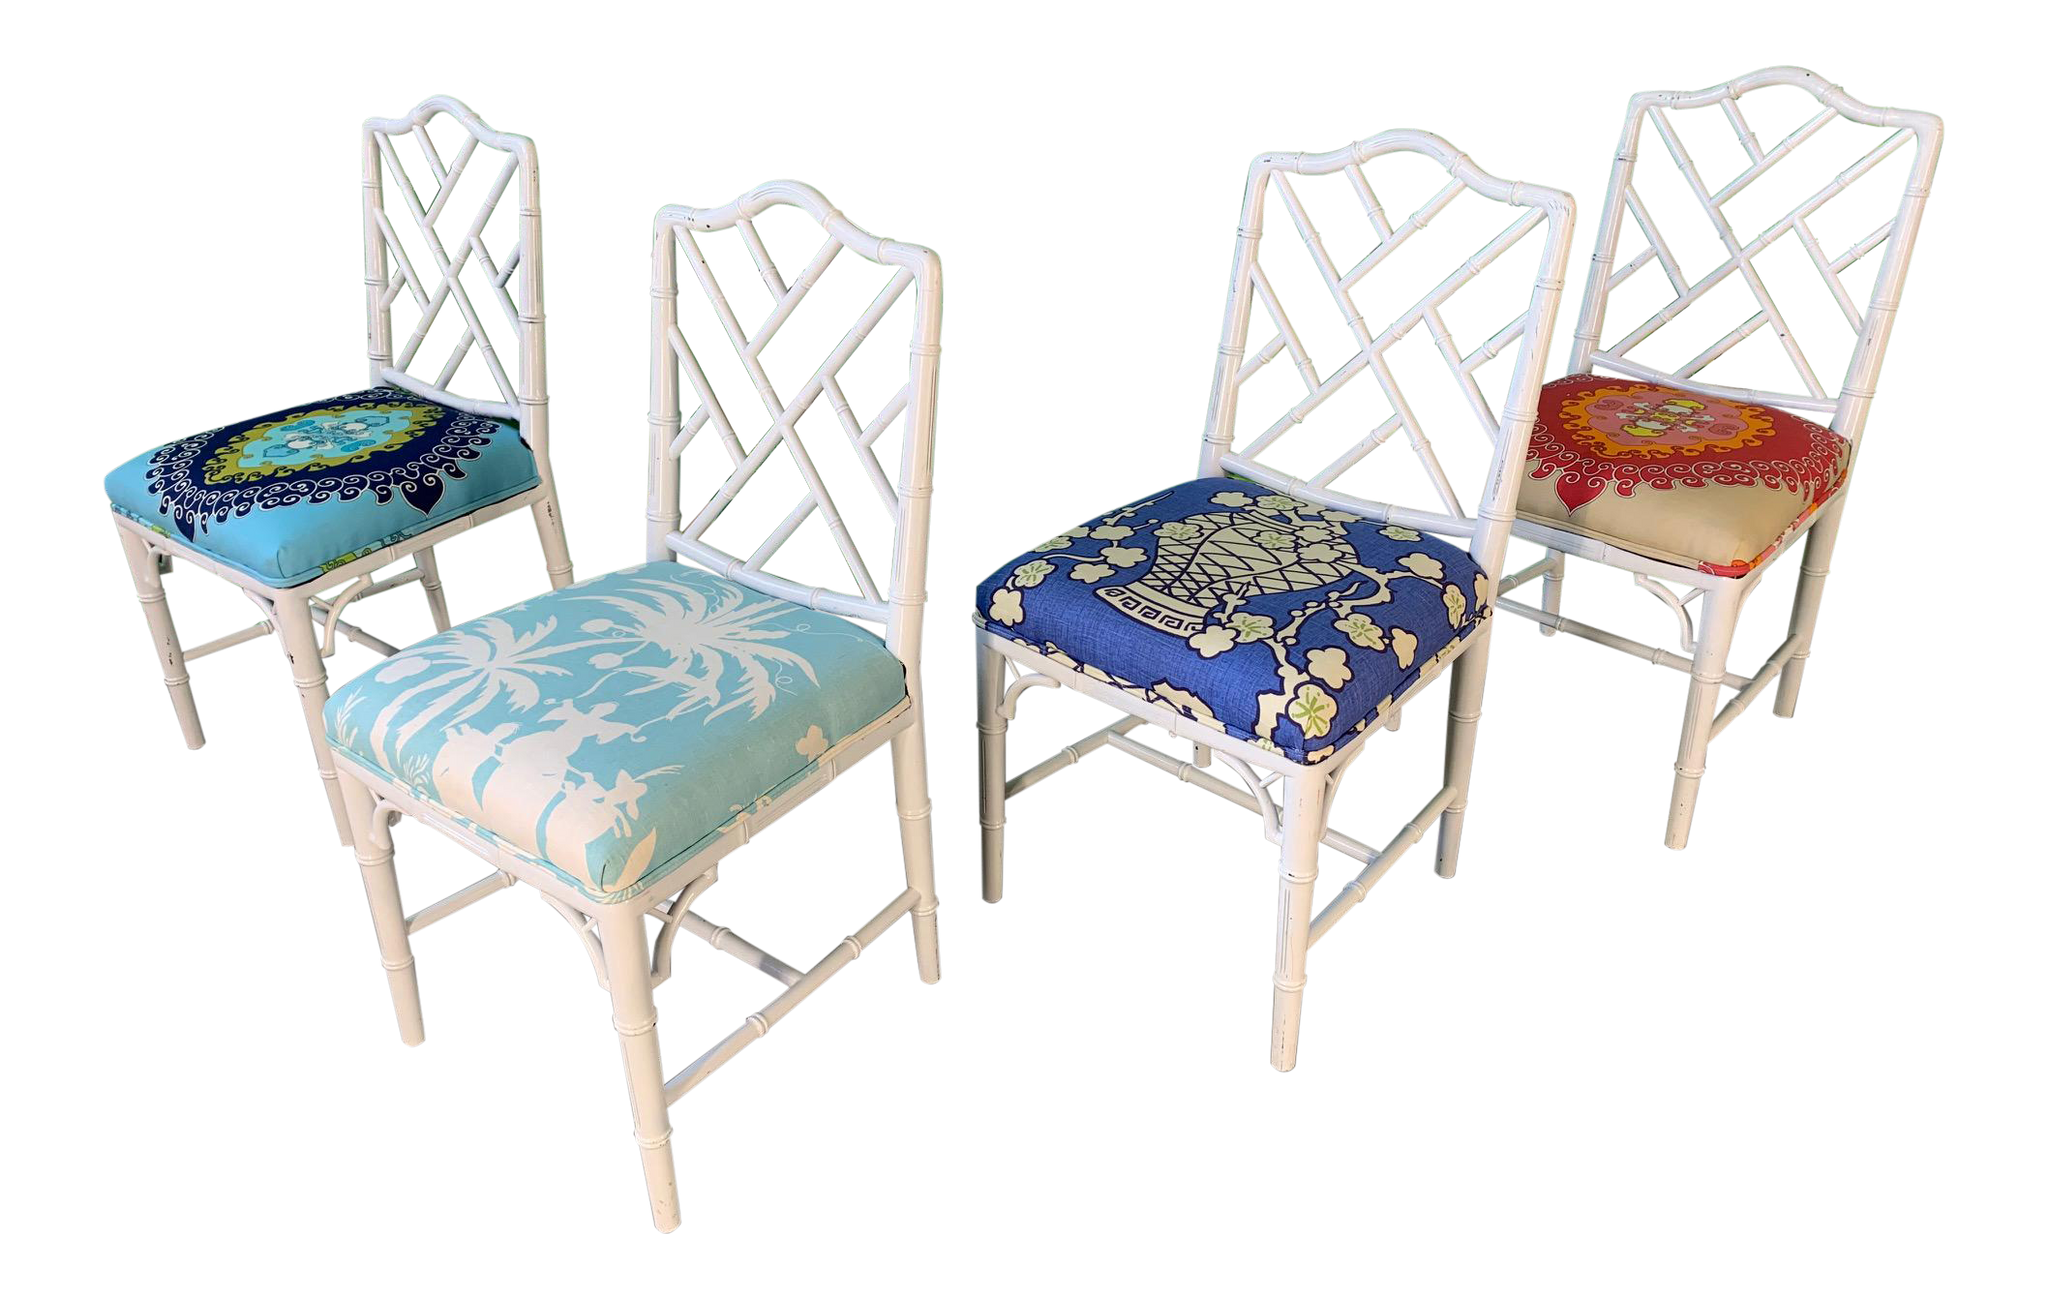 Faux Bamboo Chinoiserie Style Dining Chairs - Set of 4